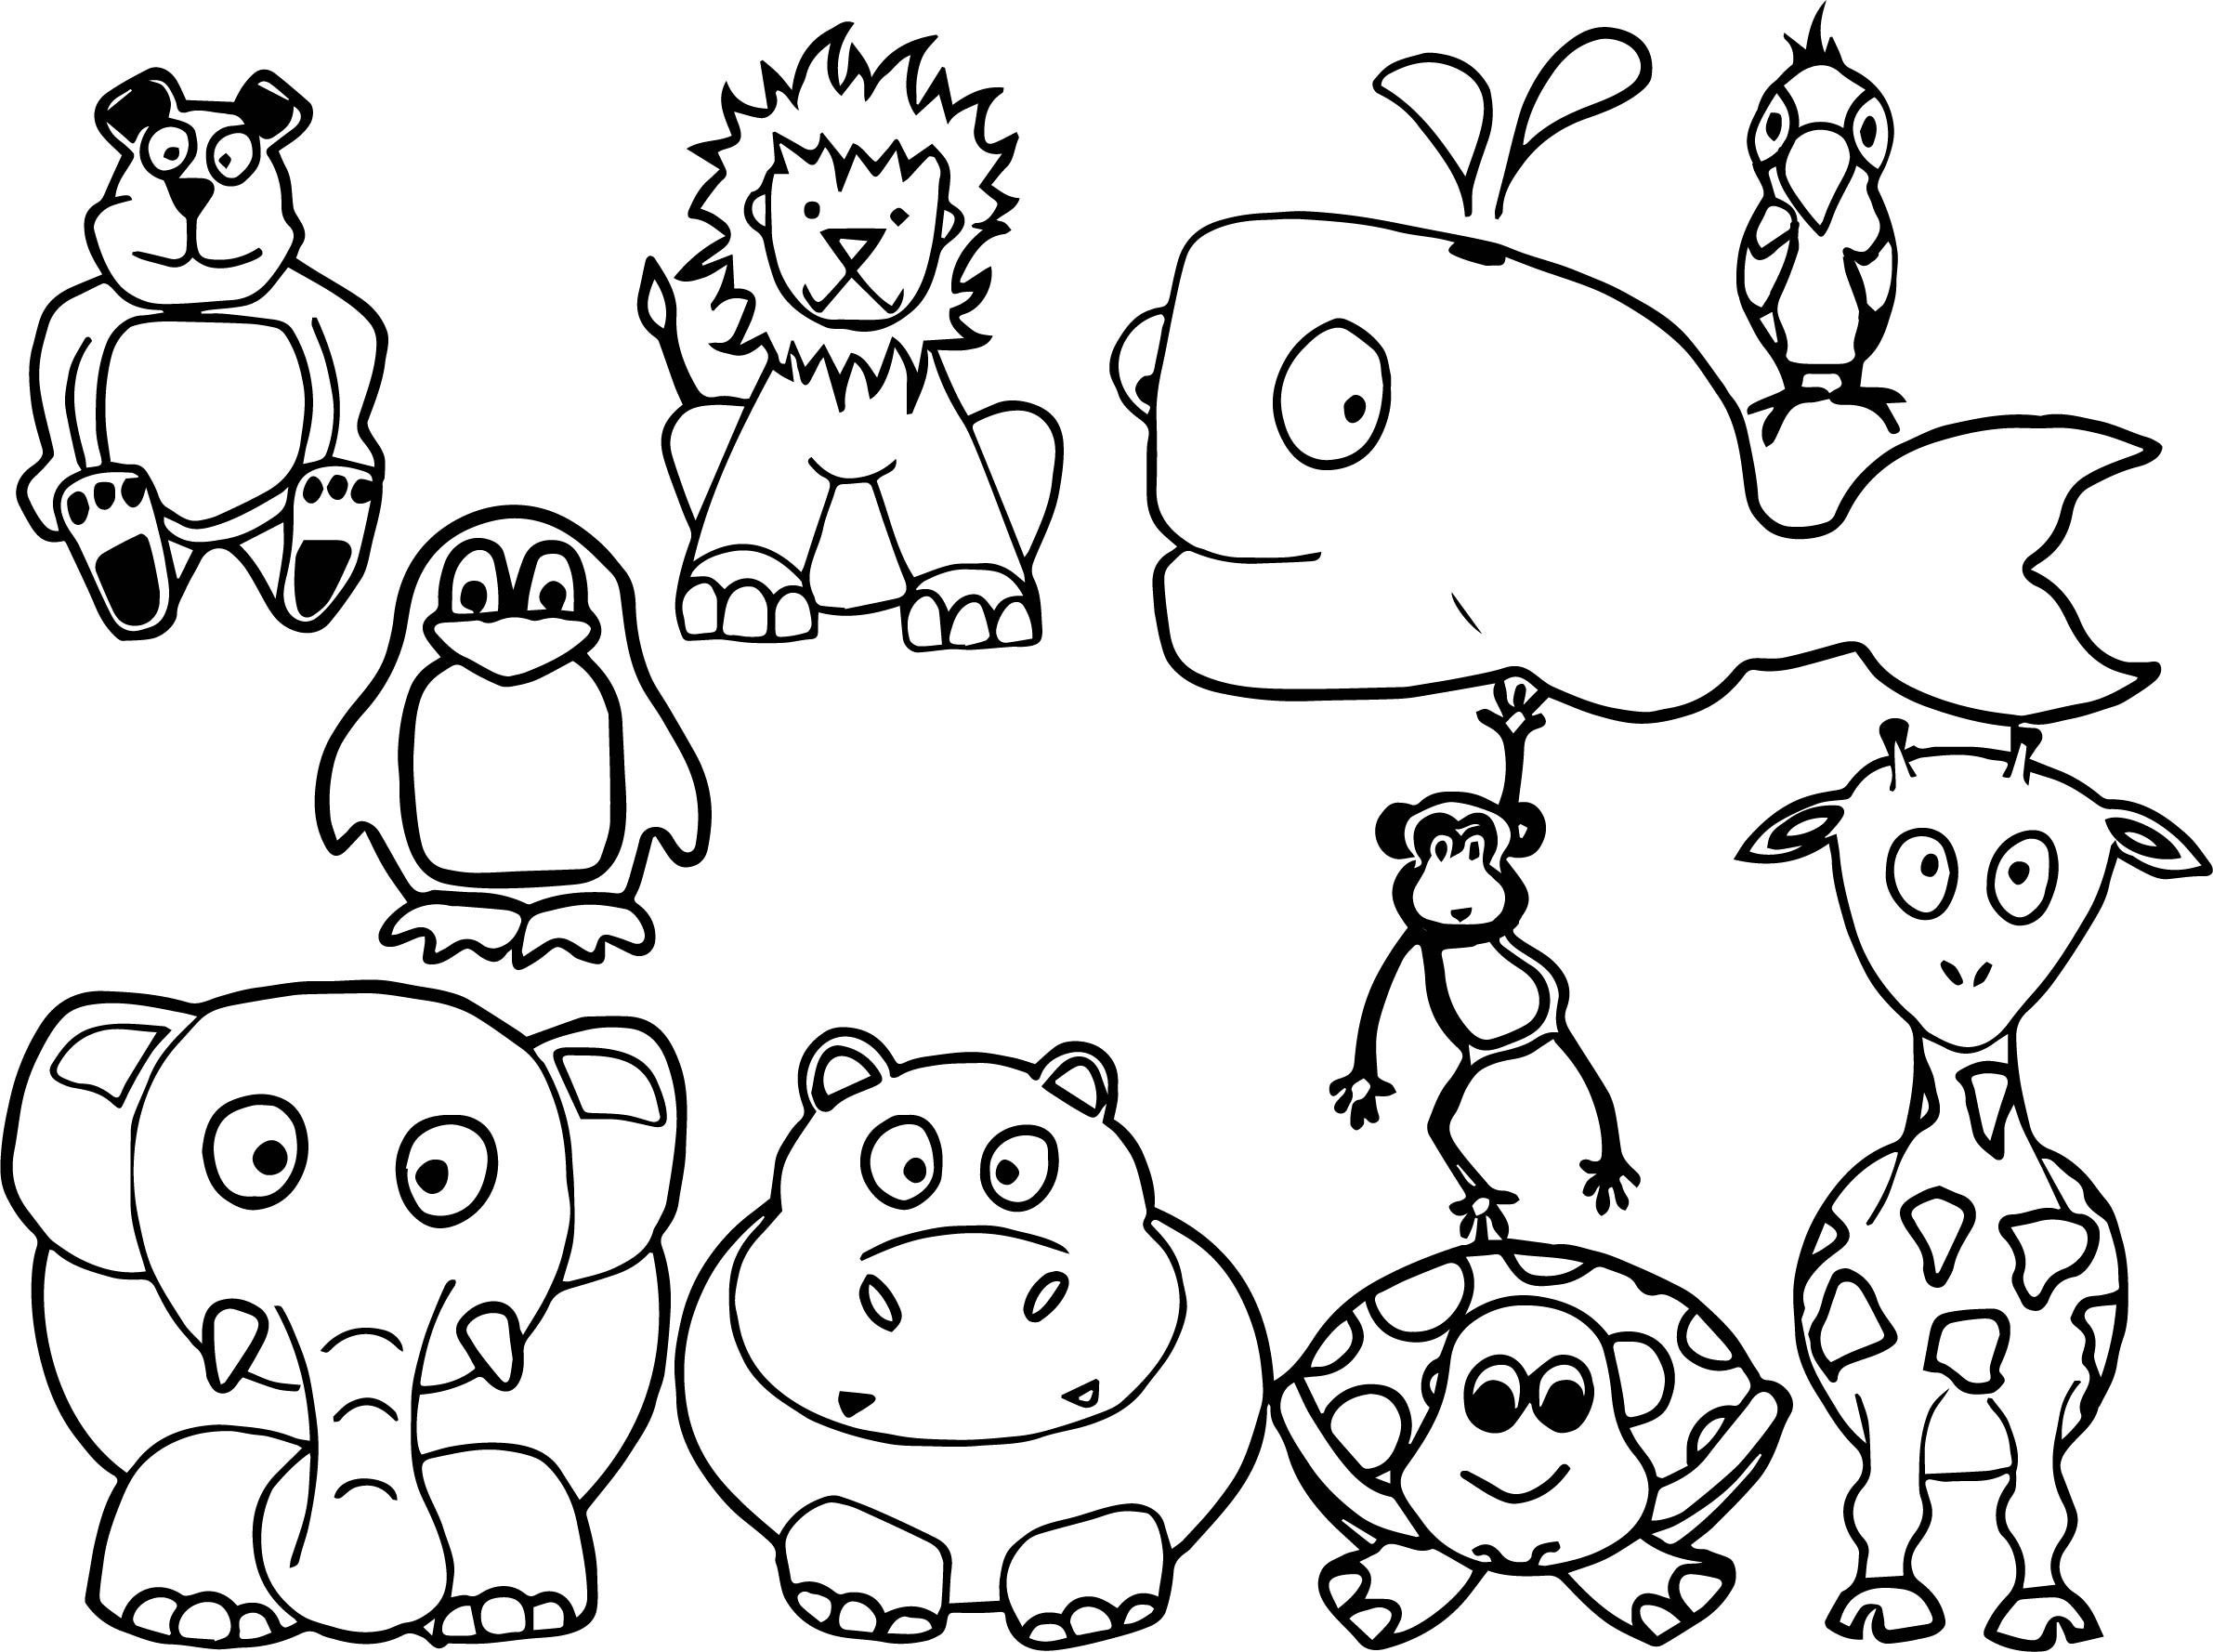 Coloring Book For Kids Animals
 Animal Coloring Pages Best Coloring Pages For Kids